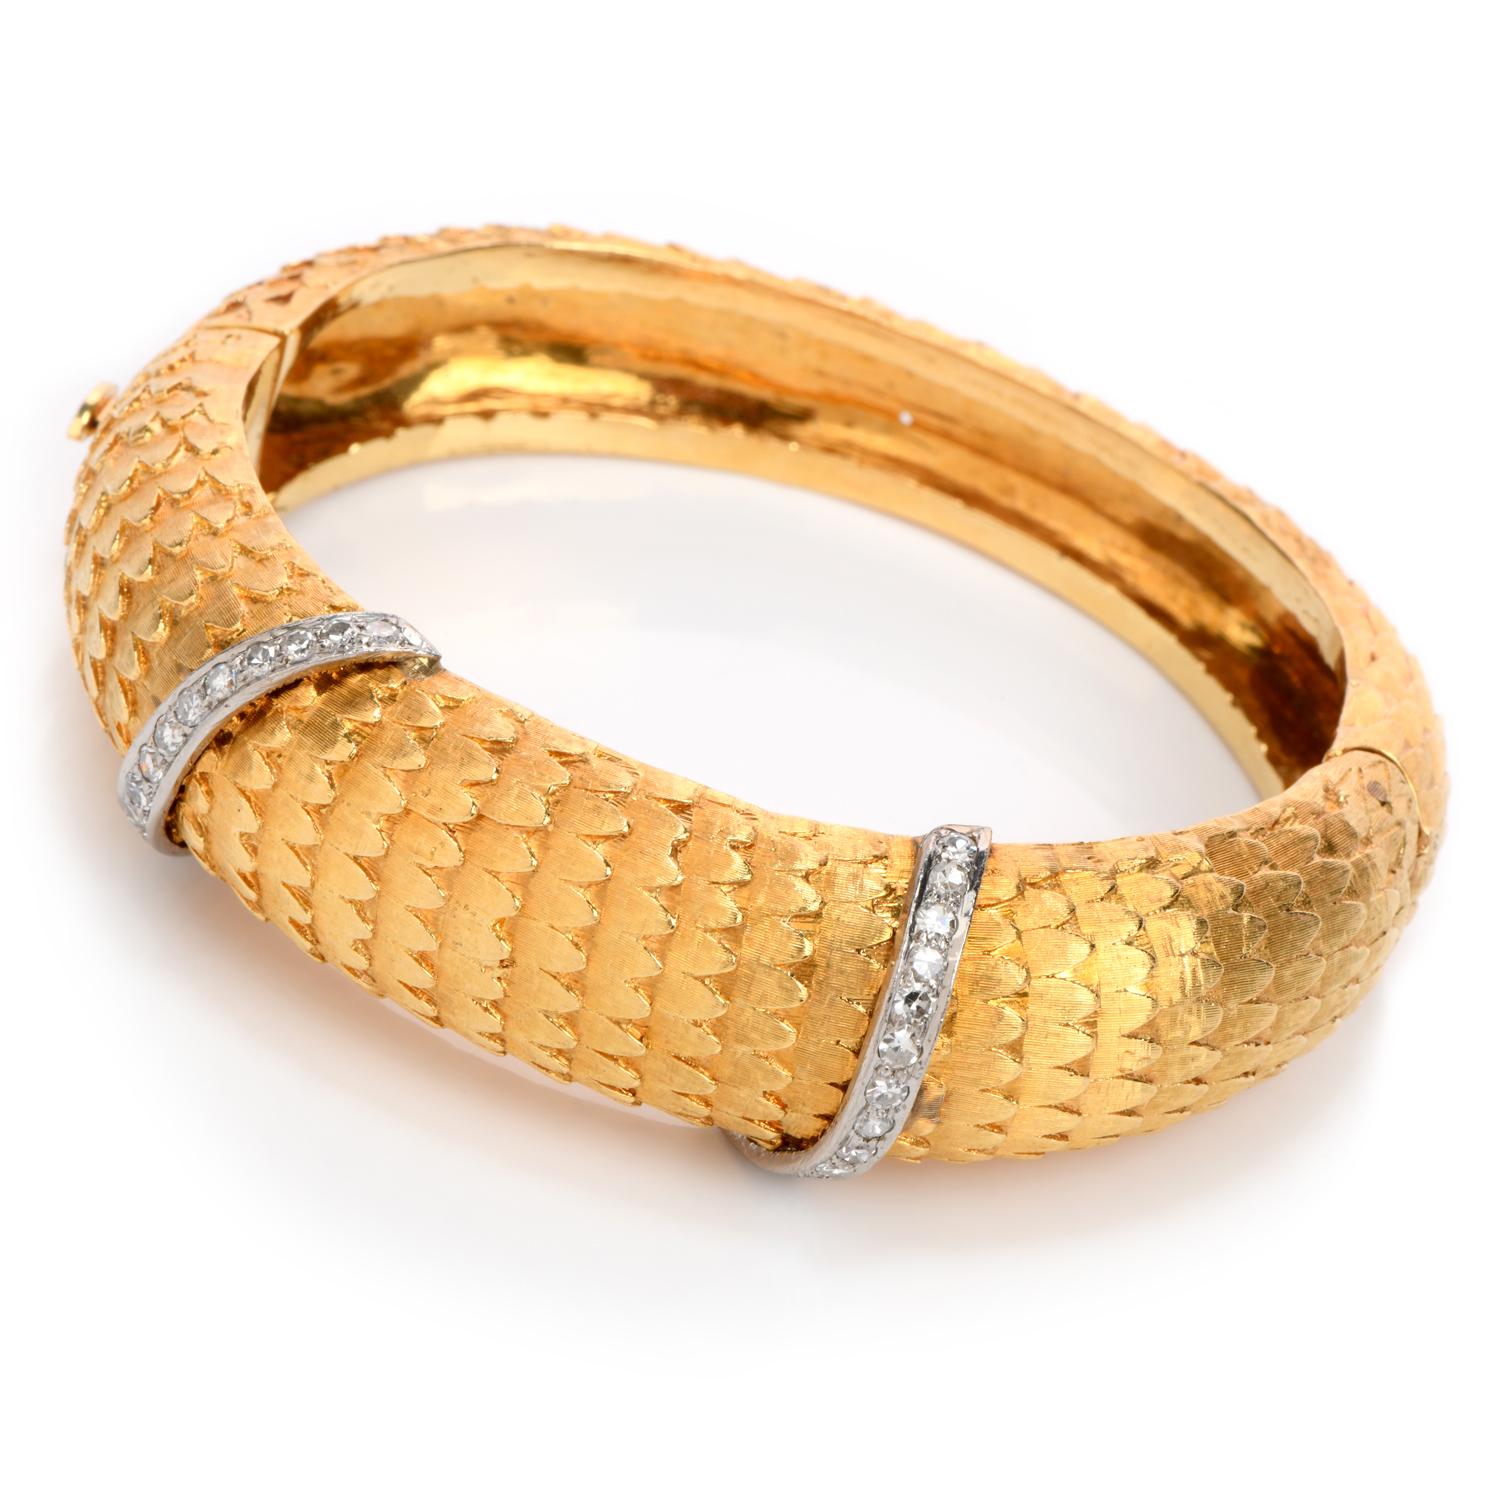 Acquire a piece of art with this mystical Vintage Van Gogh Diamond 18K Gold Feather Motif Bangle Bracelet!  

This enchanting bracelet is crafted in 18 karat yellow and white gold.  There are two ribbons of white gold with approximately 28